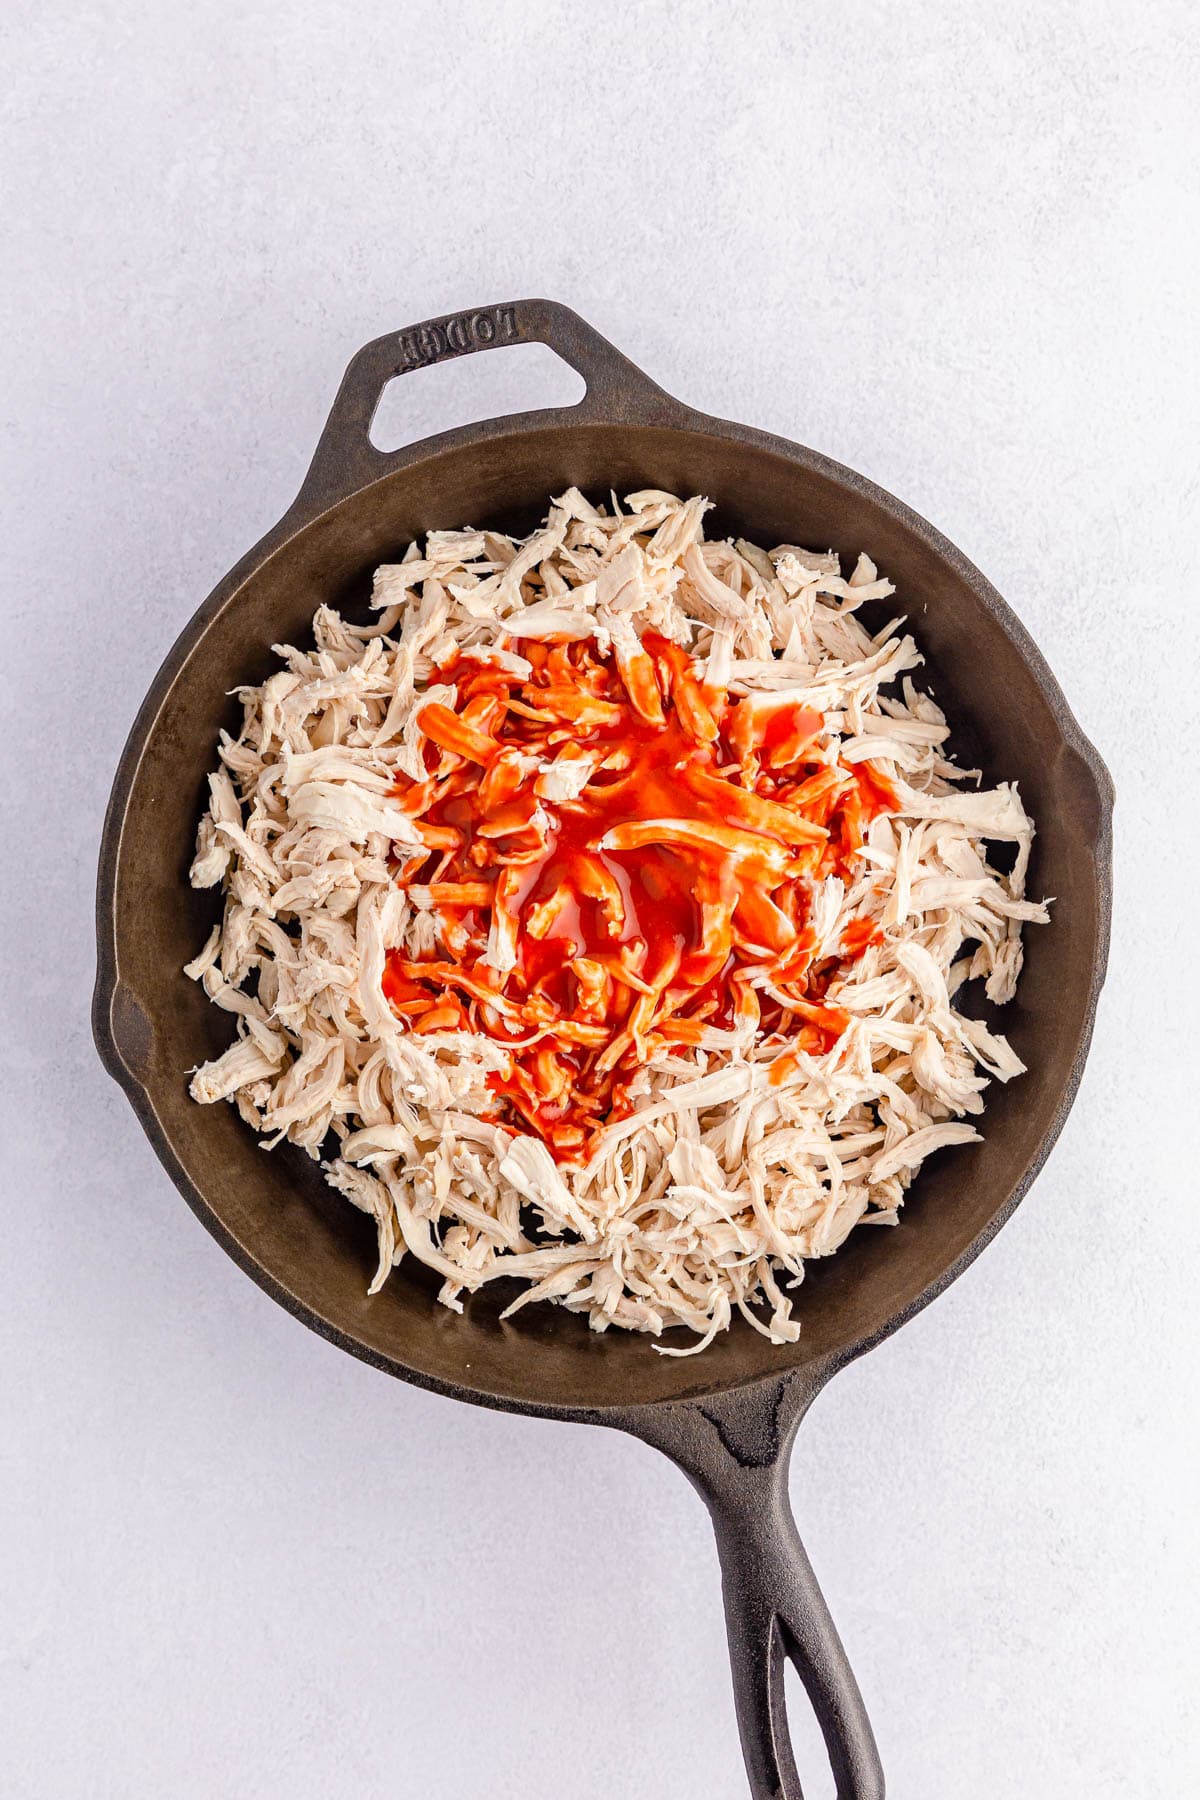 Shredded chicken and hot sauce in skillet